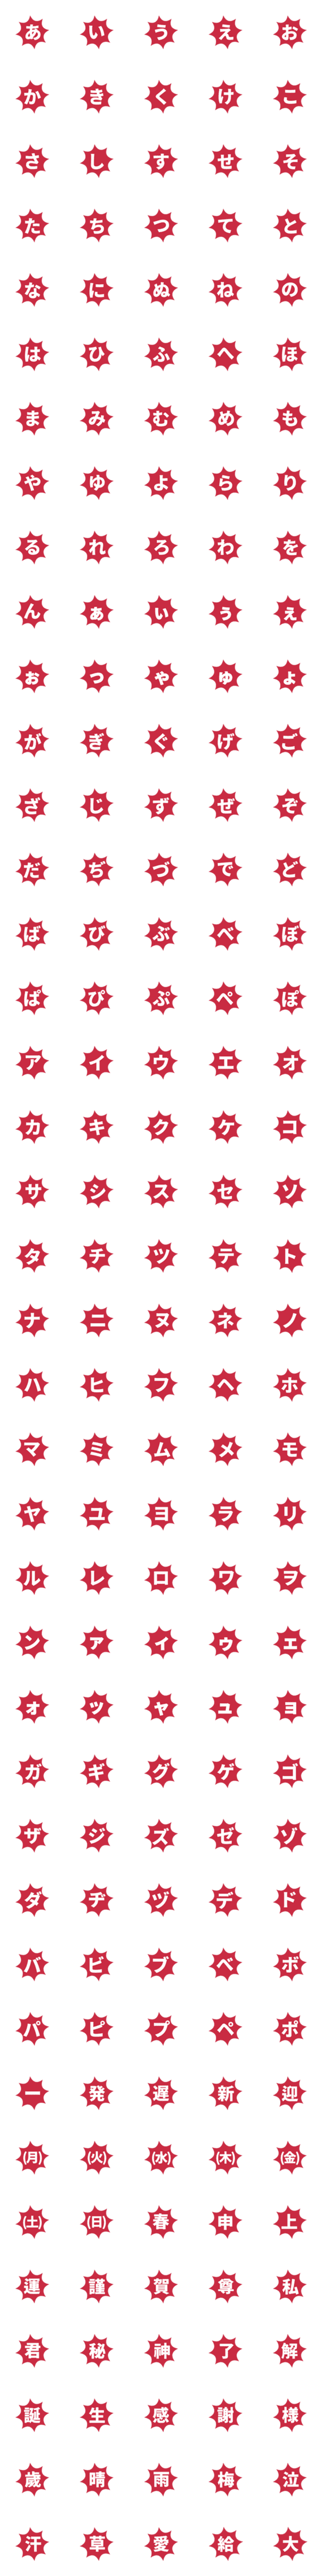 [LINE絵文字]応援 赤 あか ♥ ひらがな カタカナの画像一覧